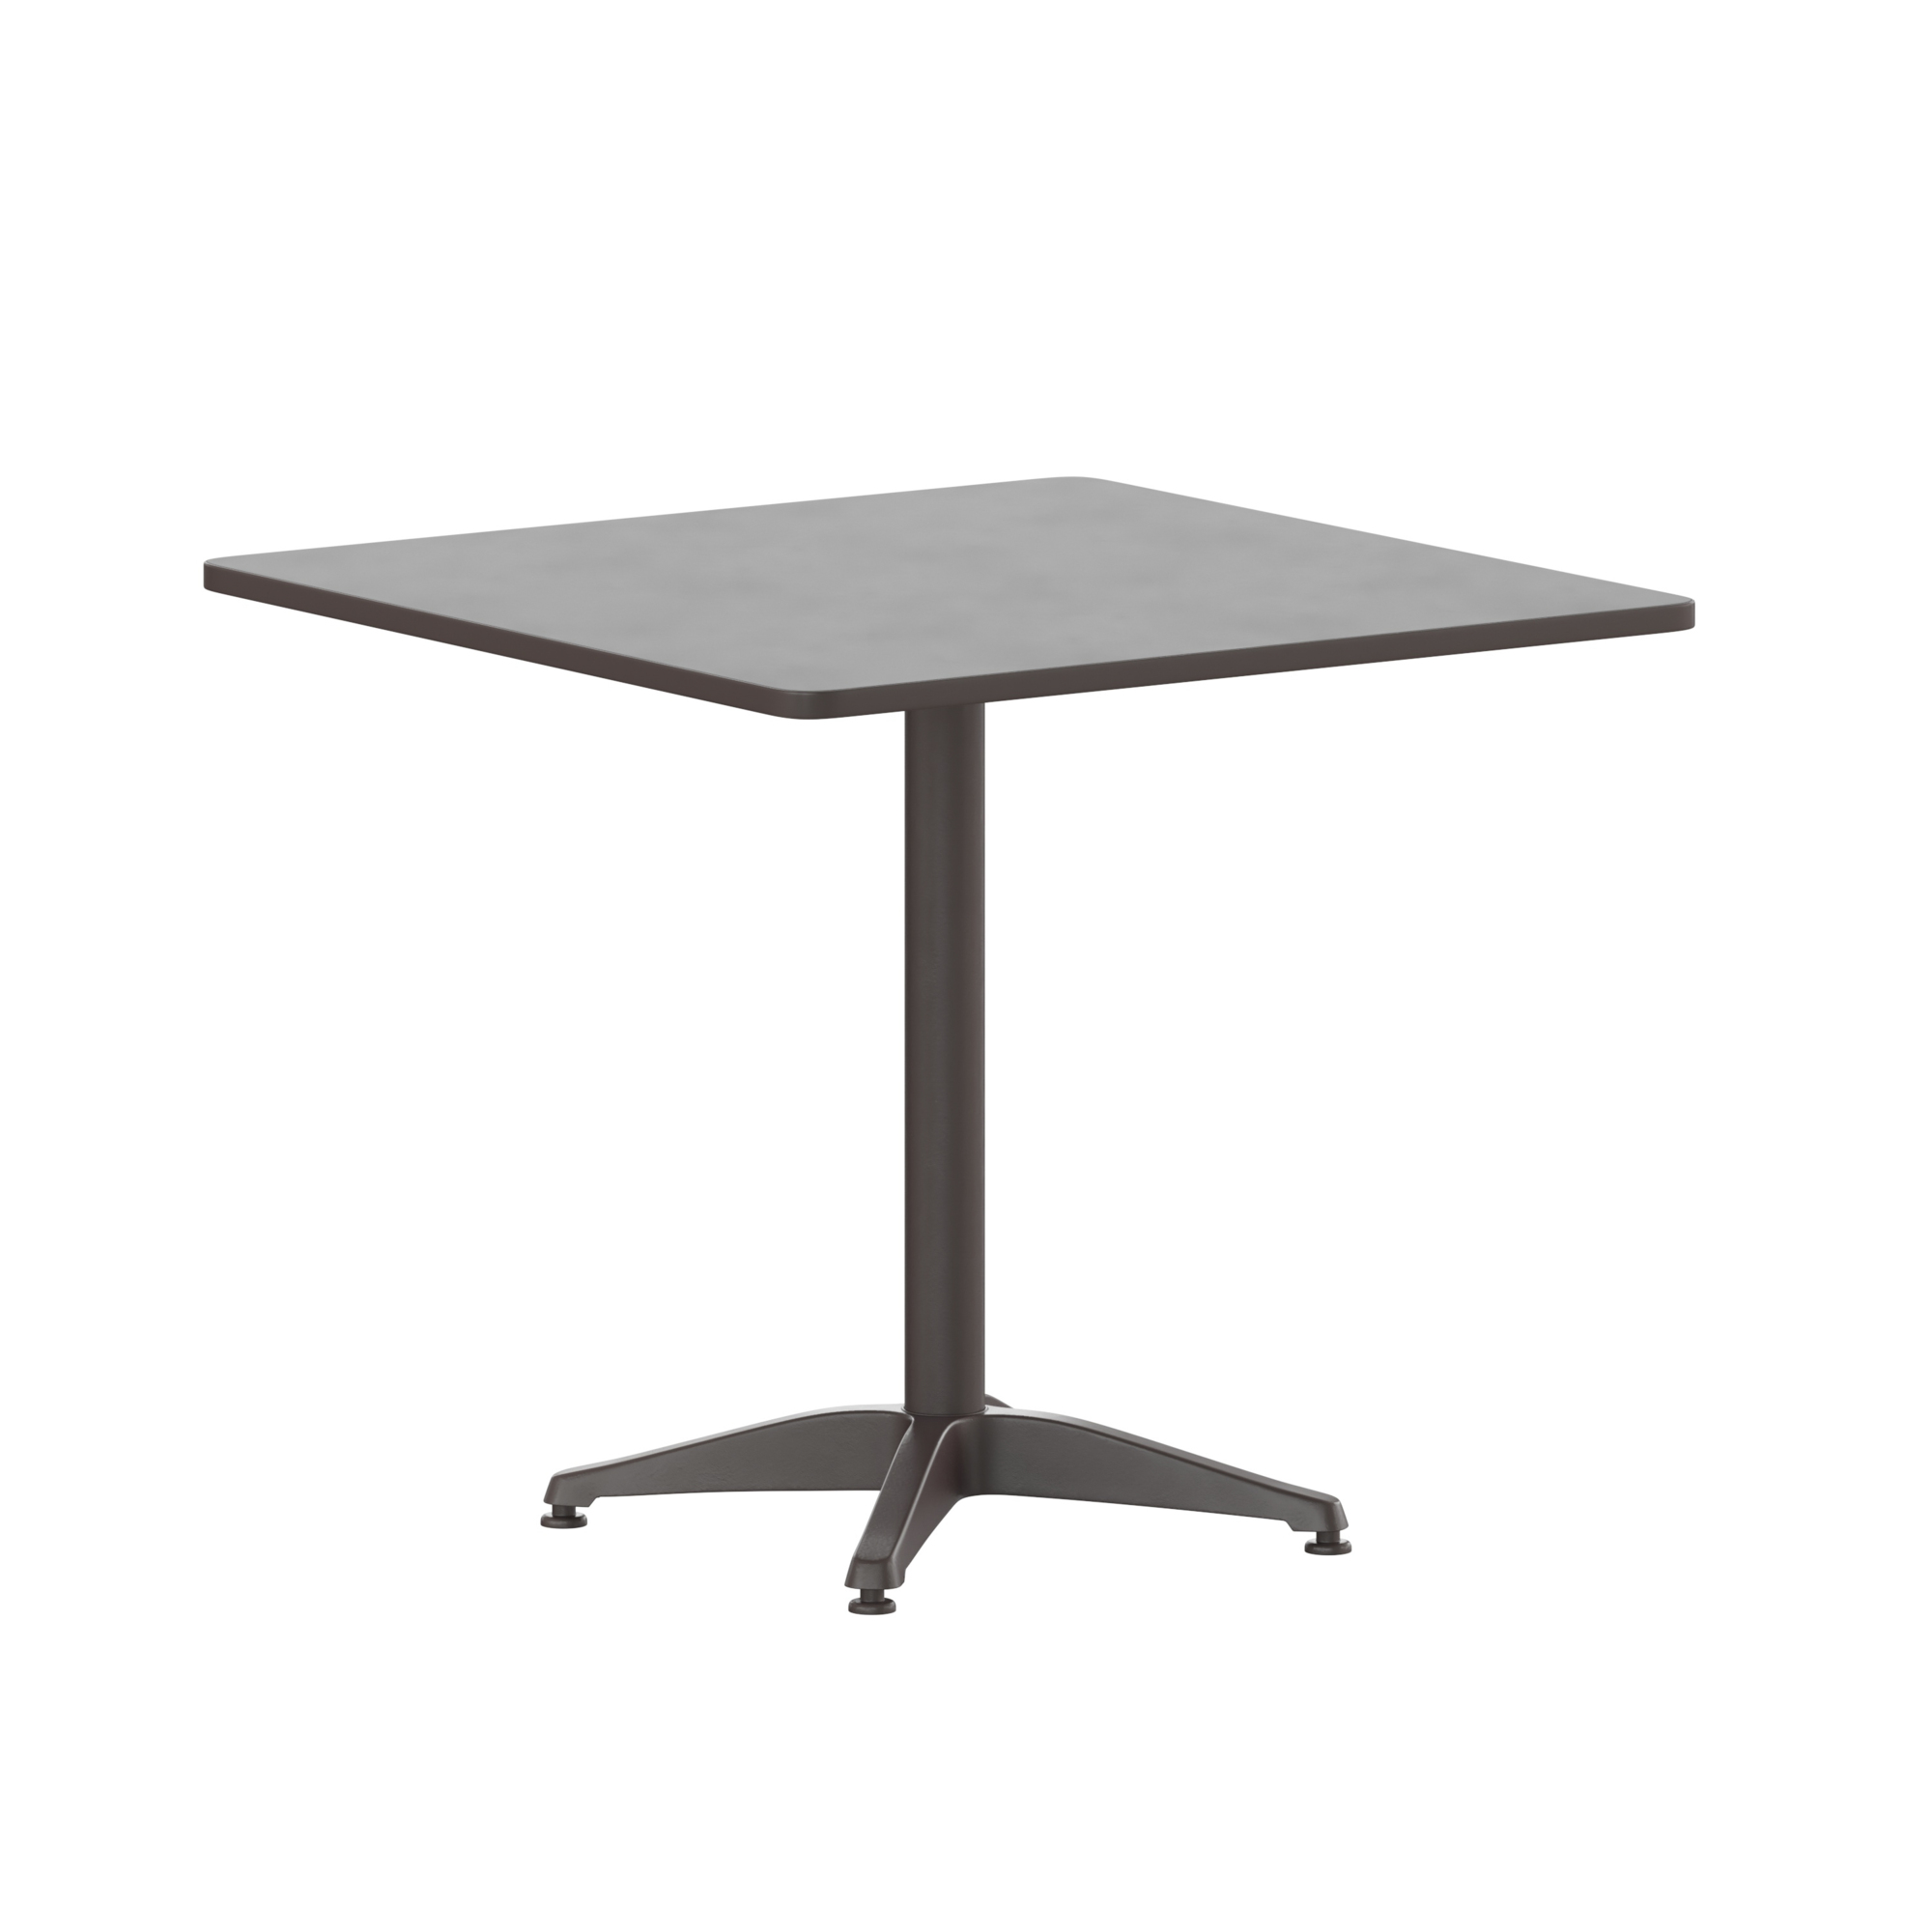 Flash Furniture, 31.5SQ Bronze Metal Indoor-Outdoor Table w/ Base, Table Shape Square, Primary Color Brown, Height 27.5 in, Model TLH0533BZ